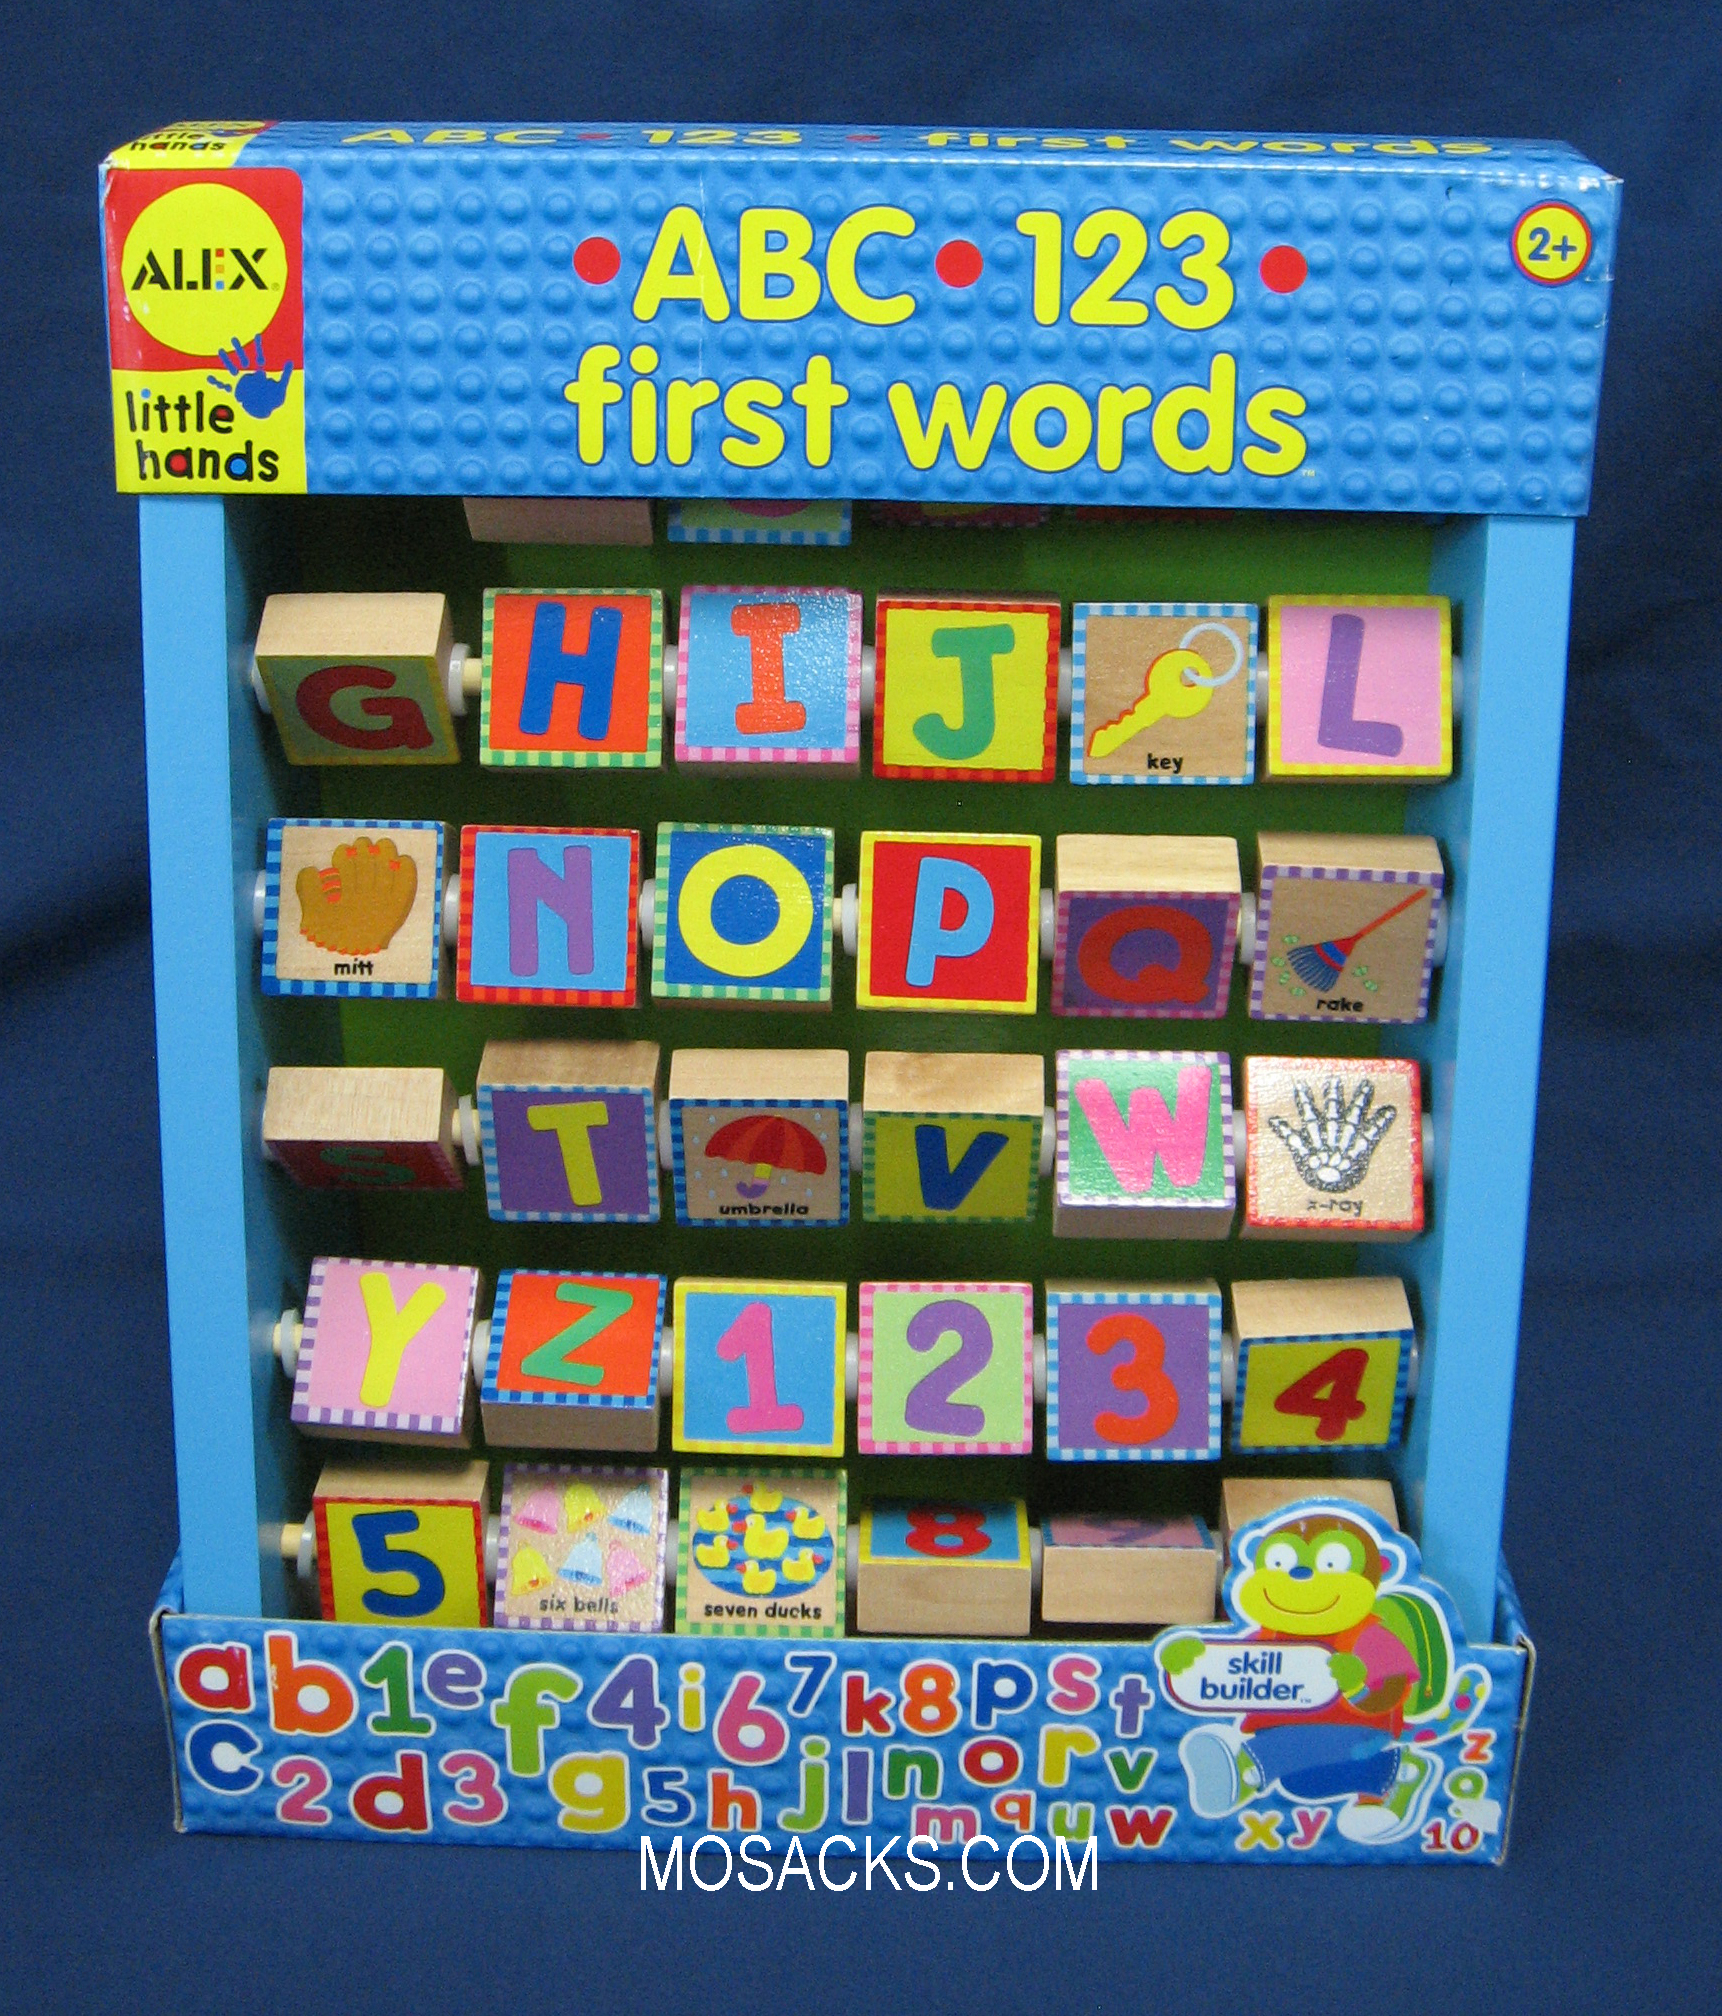 Alex Toys Little Hands ABC 123 First Words Wooden Toy Age 2+ 0731346147400